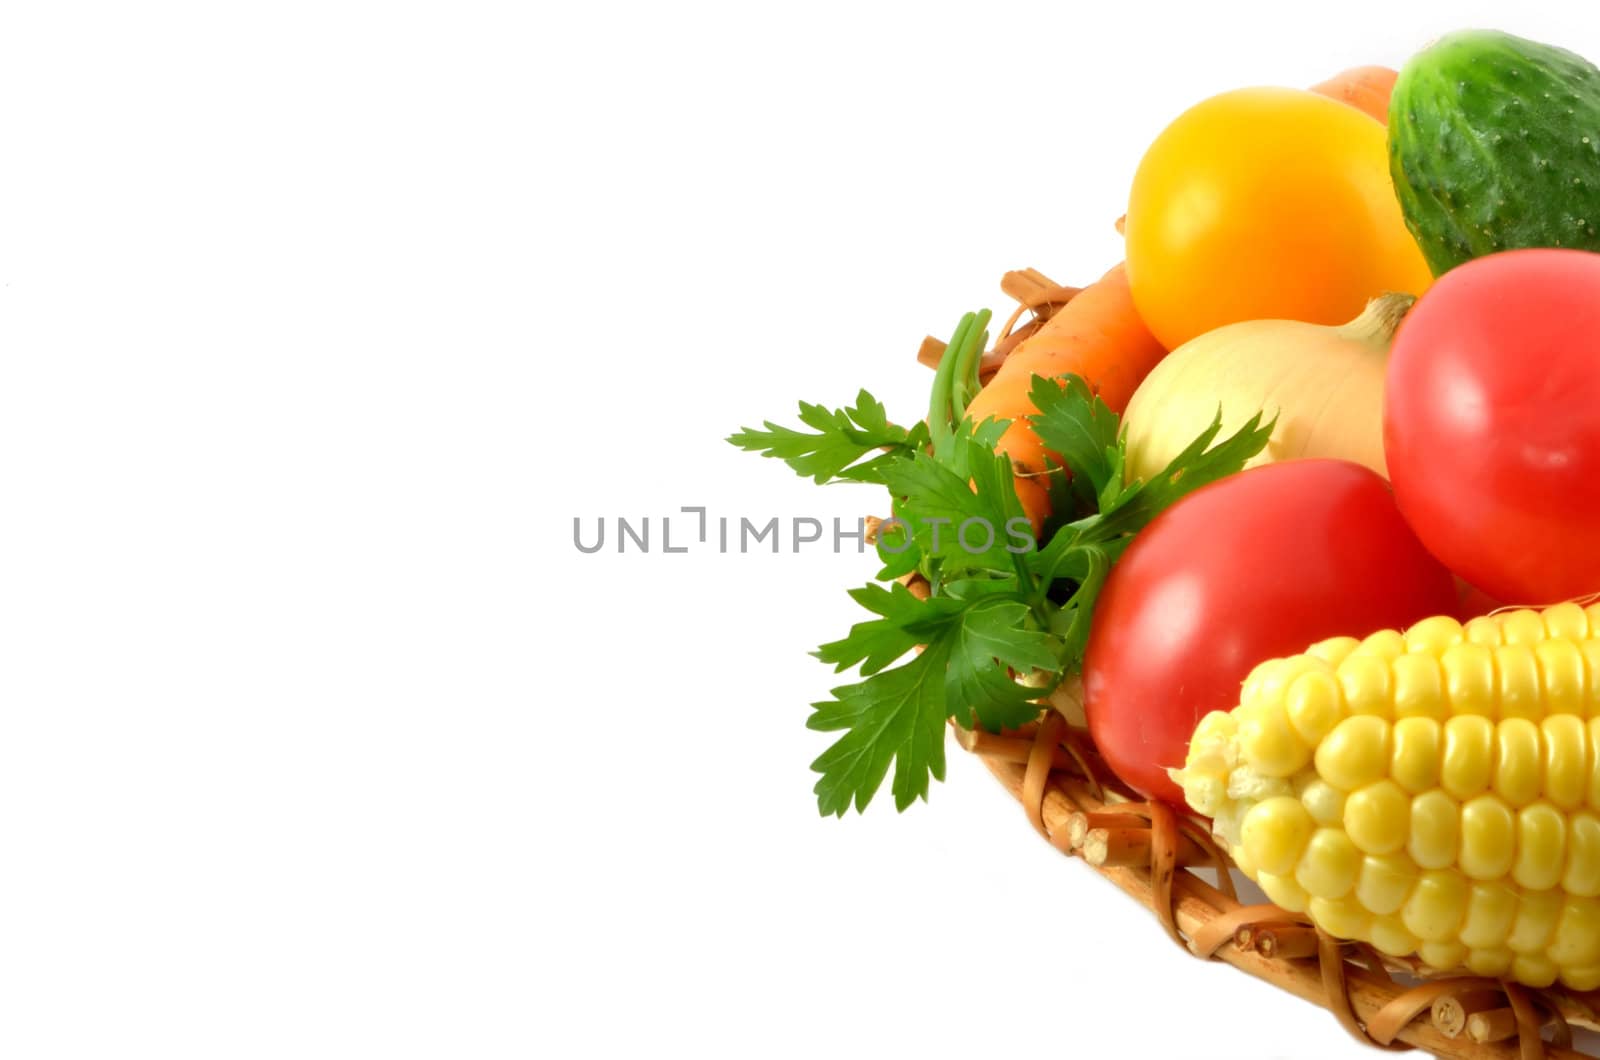 wattled plate with vegetables, tomatoes, onions, corn, a cucumber and carrots